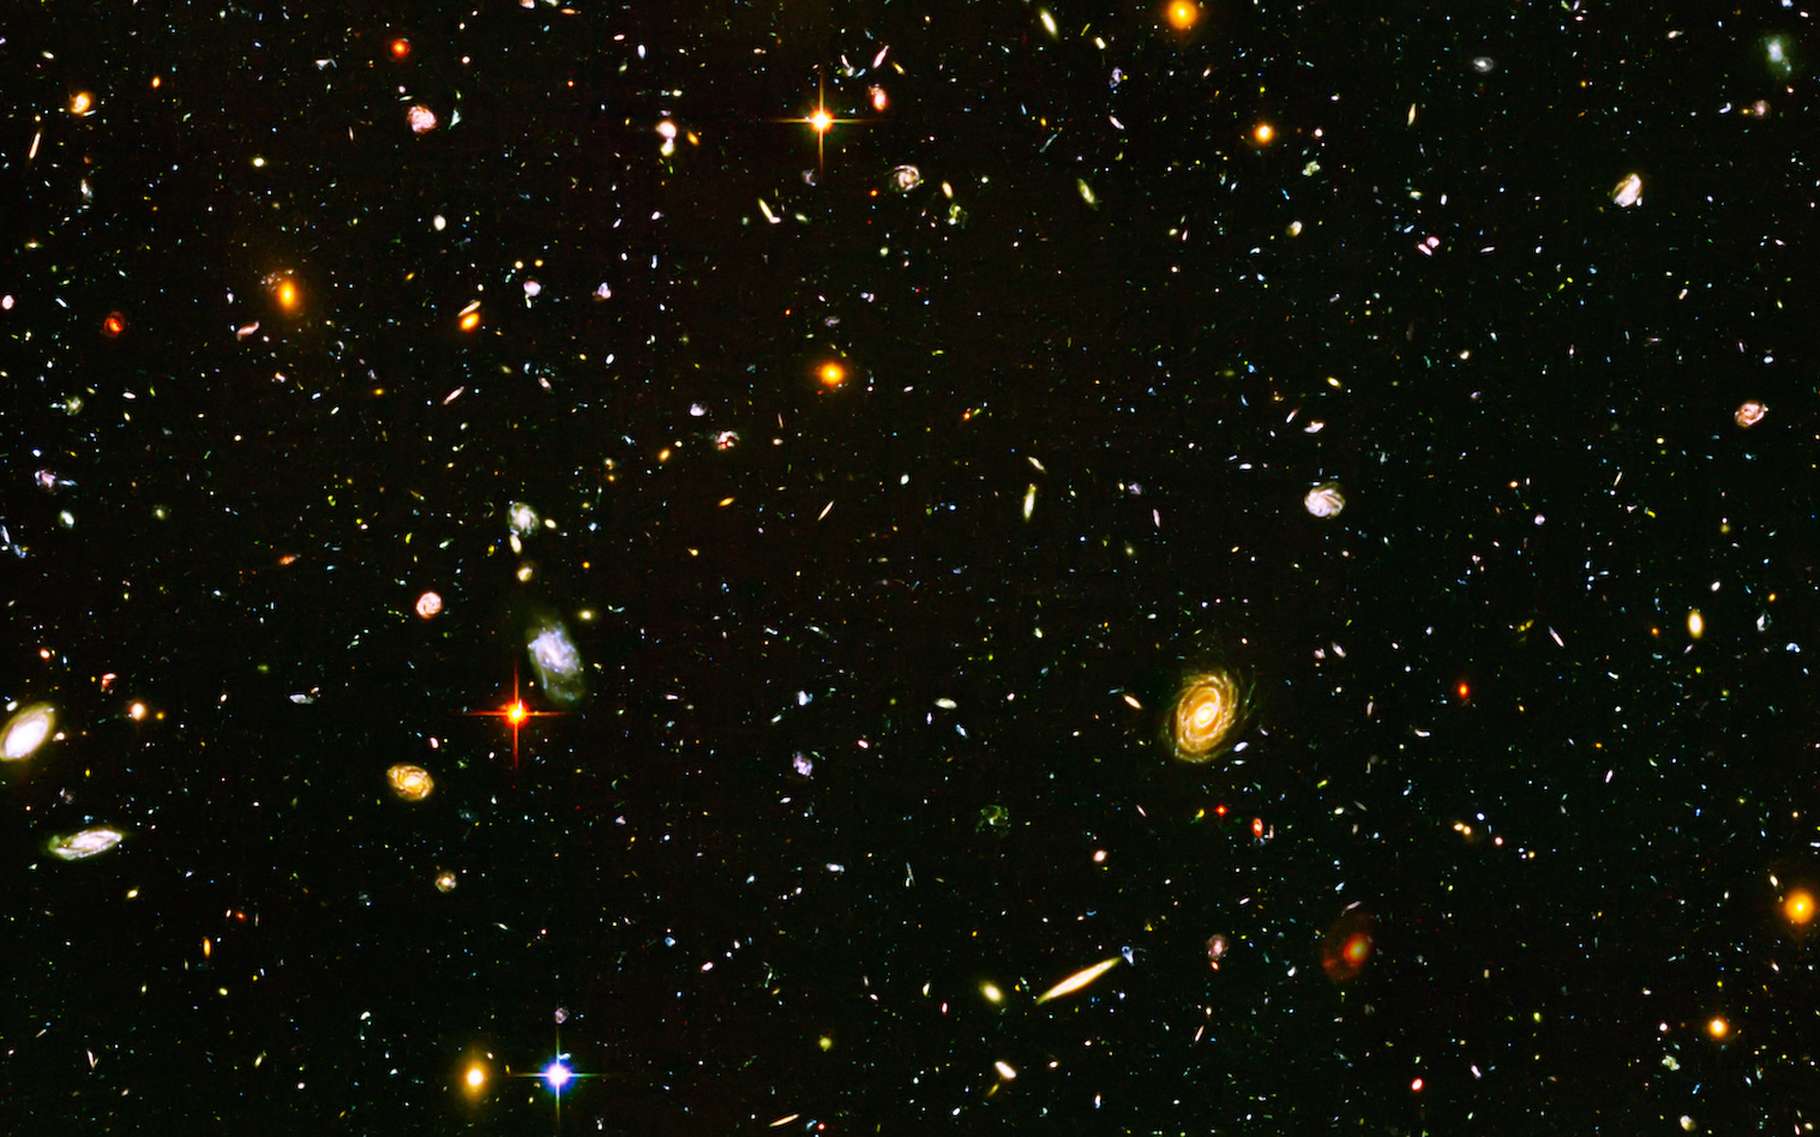 Hubble takes another step in determining the expansion rate of the universe